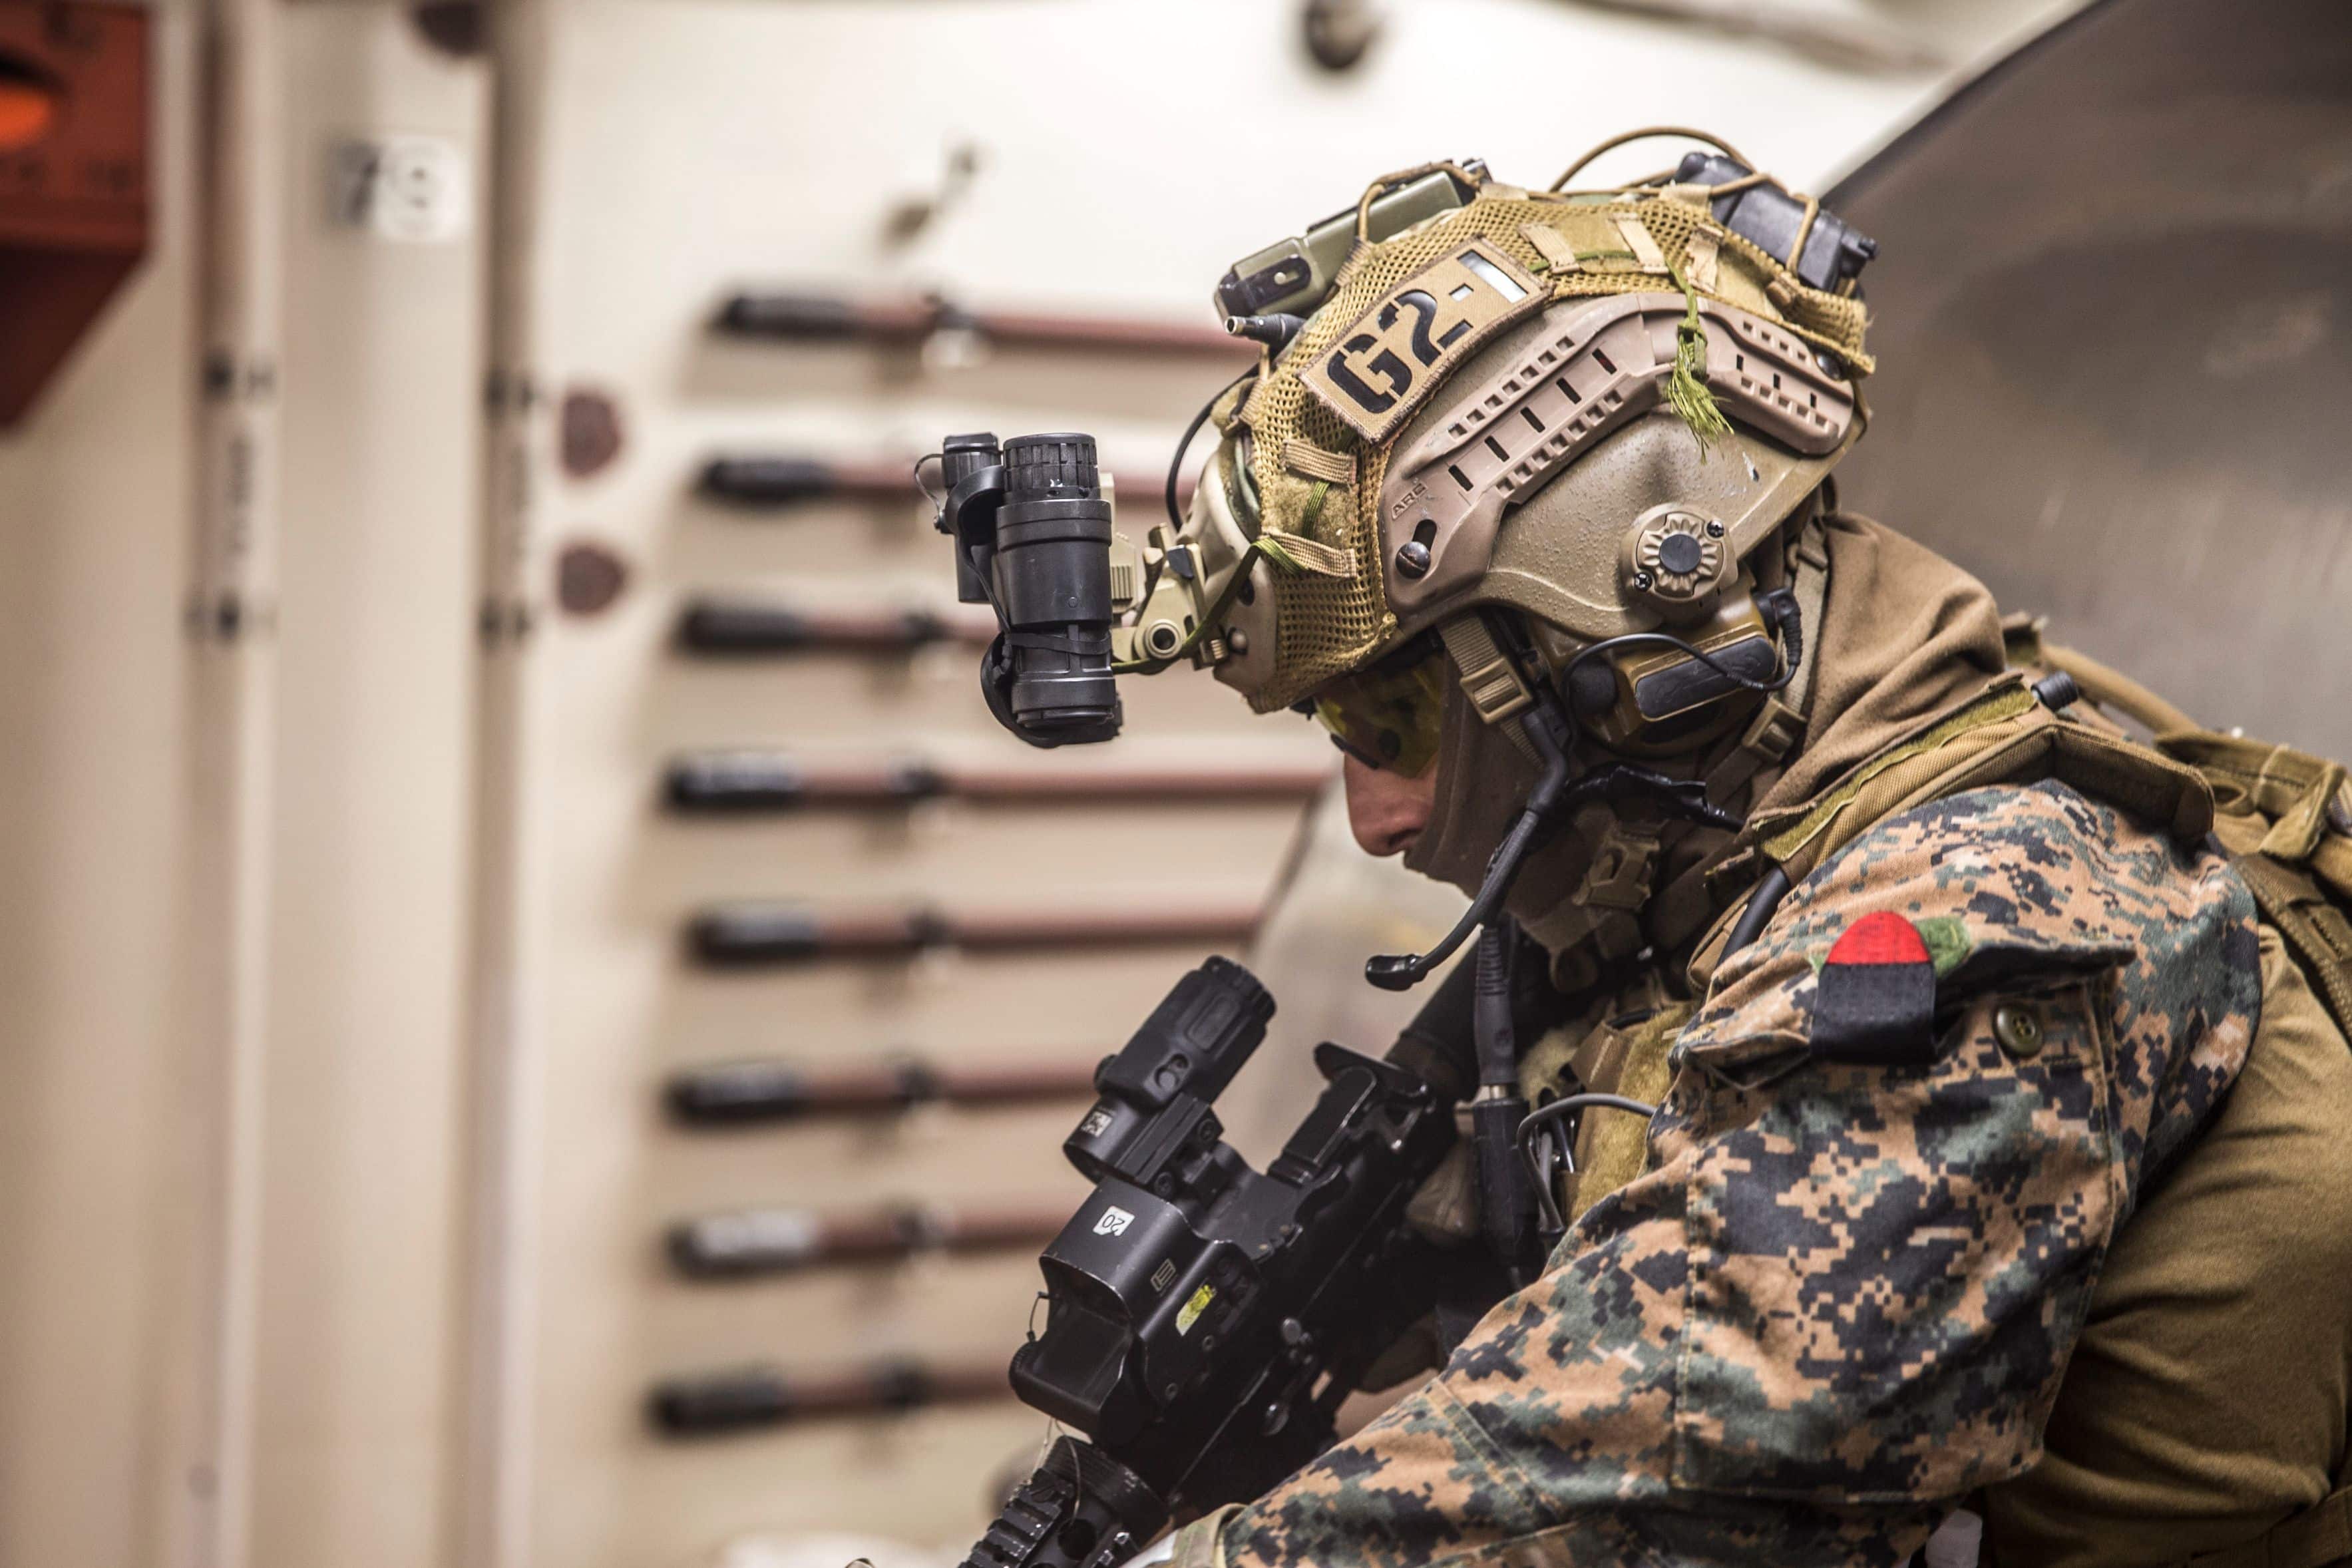 A U.S. Marine with the Maritime Raid Force, 26th Marine Expeditionary Unit (MEU), provides security as part of a Visit, Board, Search and Seizure (VBSS) mission during Amphibious Ready Group (ARG), MEU exercise (ARGMEUEX) in the vicinity of Camp Lejeune, North Carolina, Aug. 27, 2019. VBSS is part of the Maritime Interception Operations that aim to delay, disrupt, or destroy enemy forces or supplies in the Maritime domain. (U.S. Marine Corps photo by Cpl. Tanner Seims)